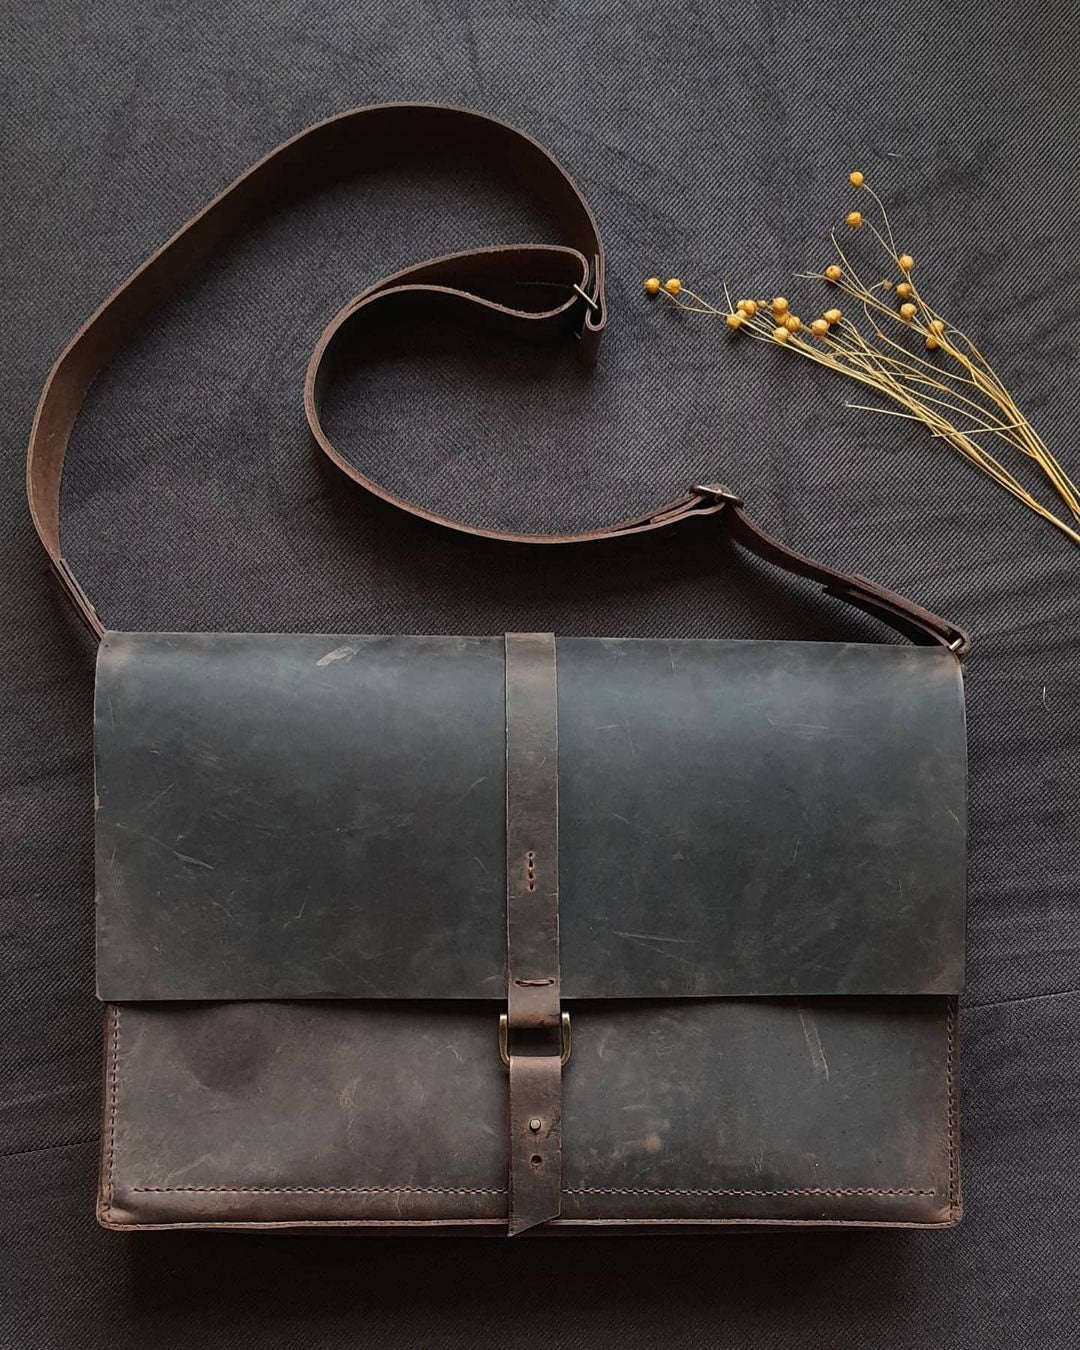 Limited Elegant Handmade Leather Purse Crossbody Suitable For Laptop  | Leather Bag | Leather Purse Crossbody  | For Special Discont PM Me  99percenthandmade   